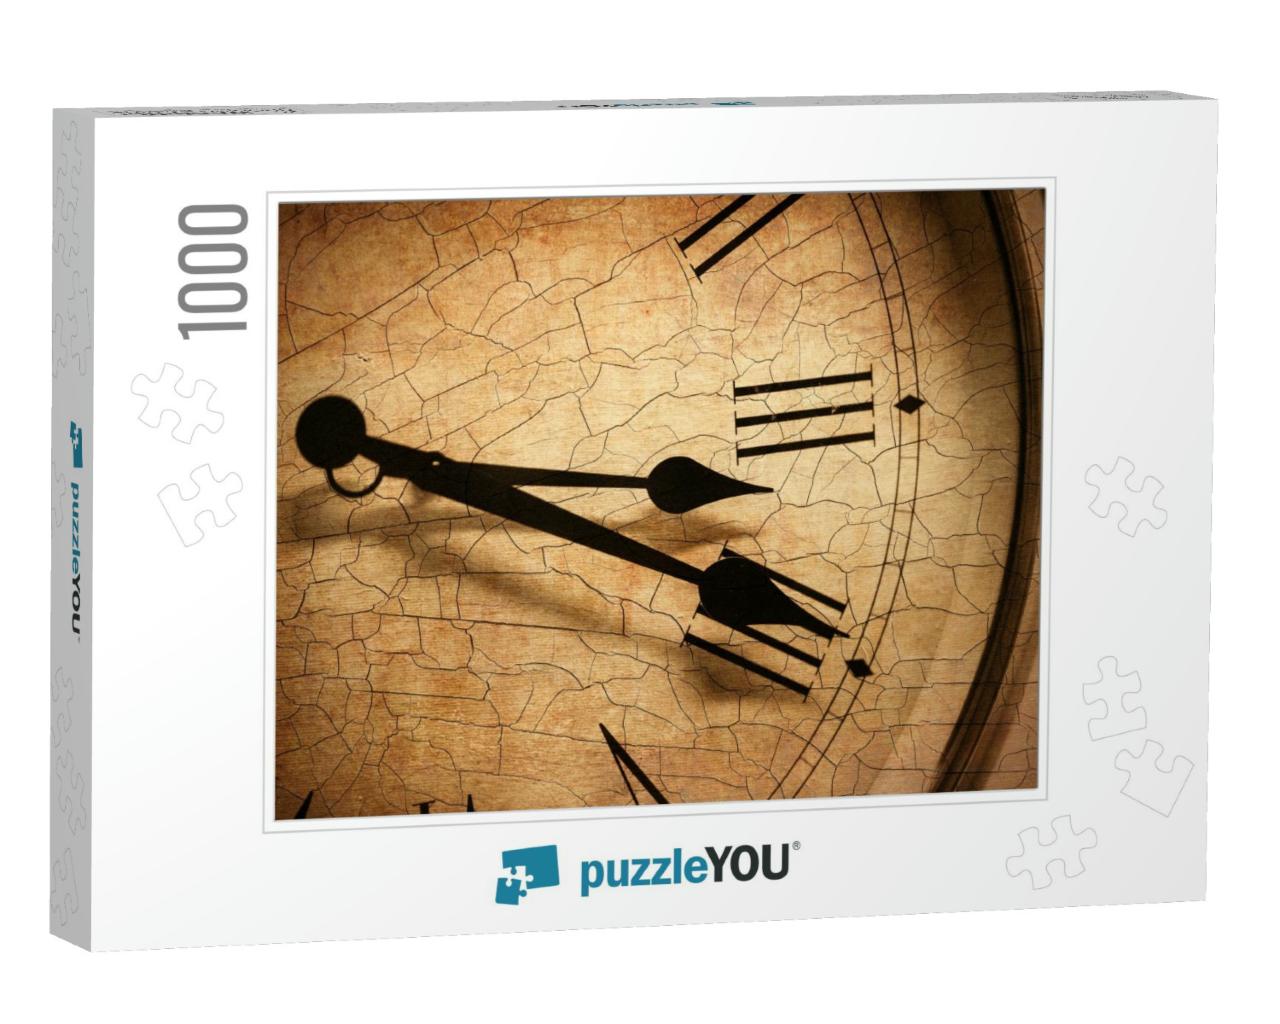 Old Times, Vintage Classic Clock Style Overlay with Crack... Jigsaw Puzzle with 1000 pieces